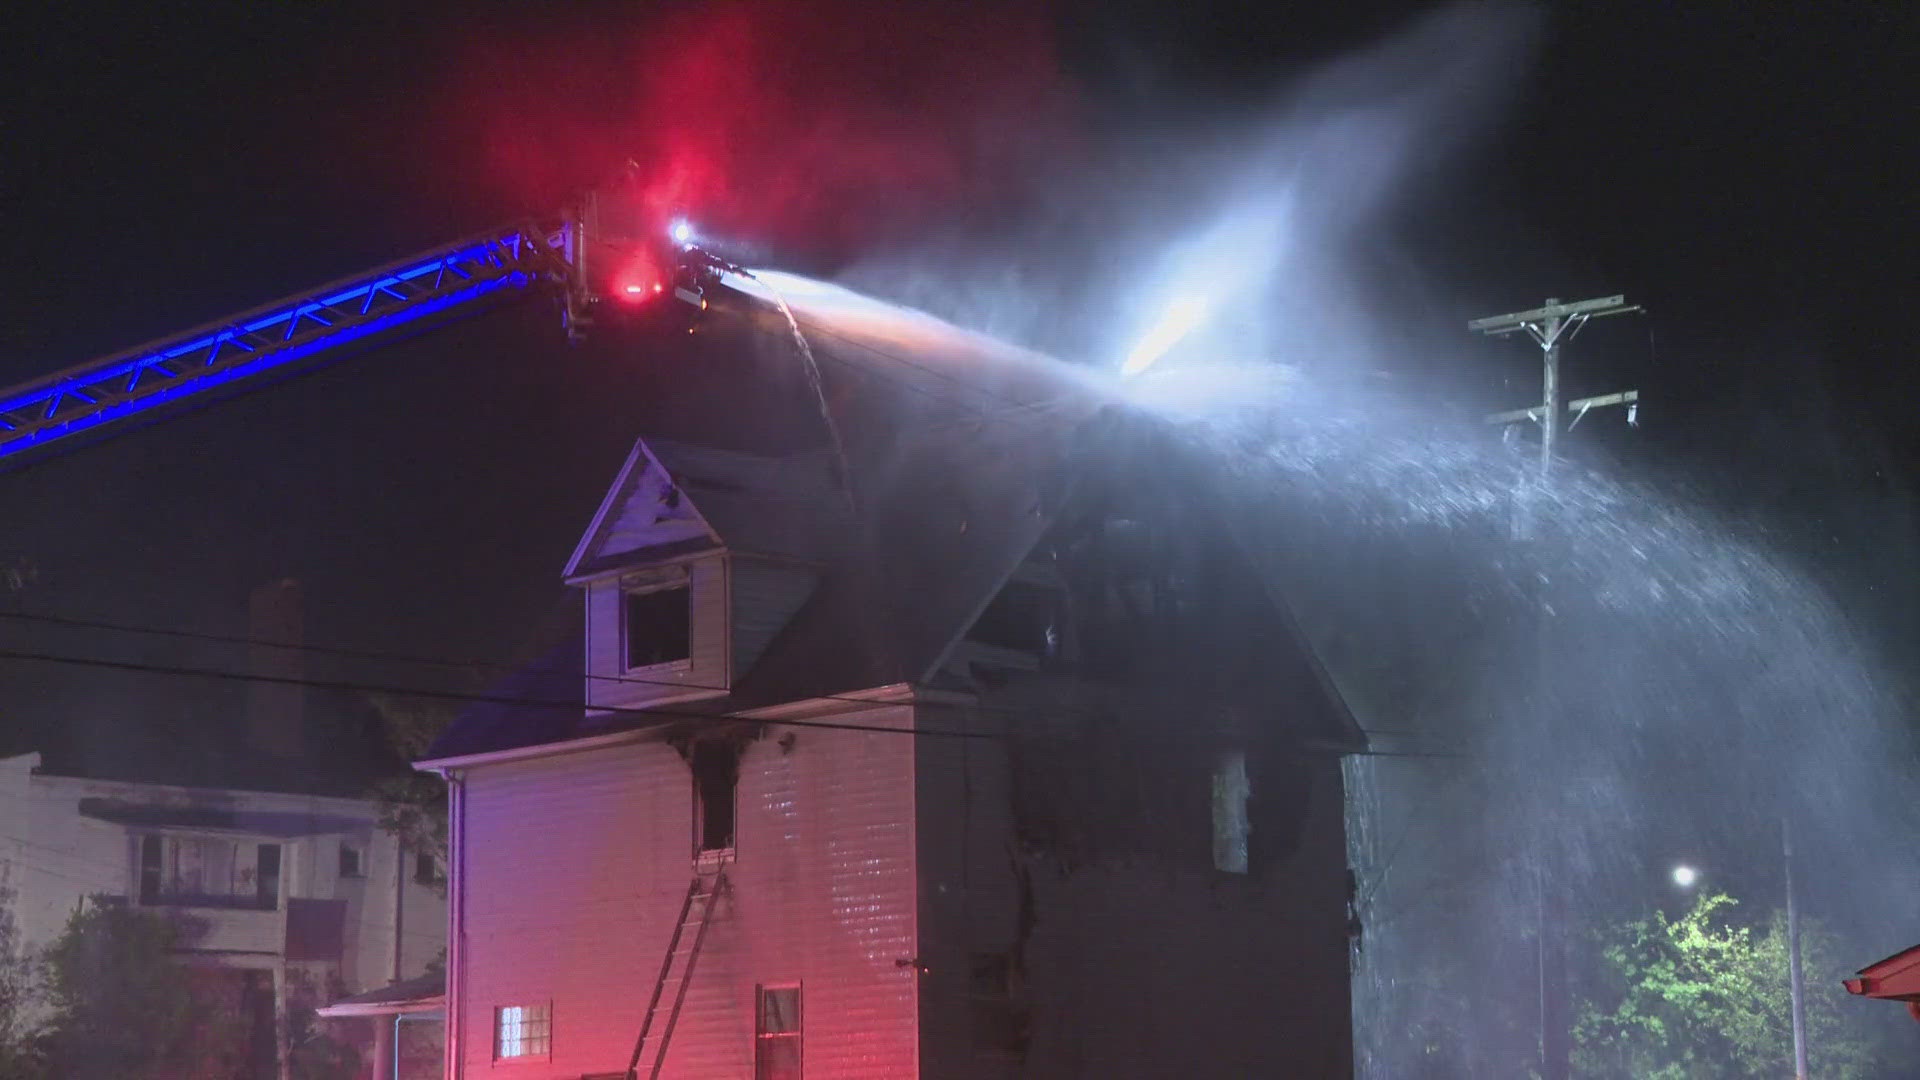 We’re following breaking news this morning as Cleveland firefighters responded to a fire overnight at a house near 88th and Hough Avenue.